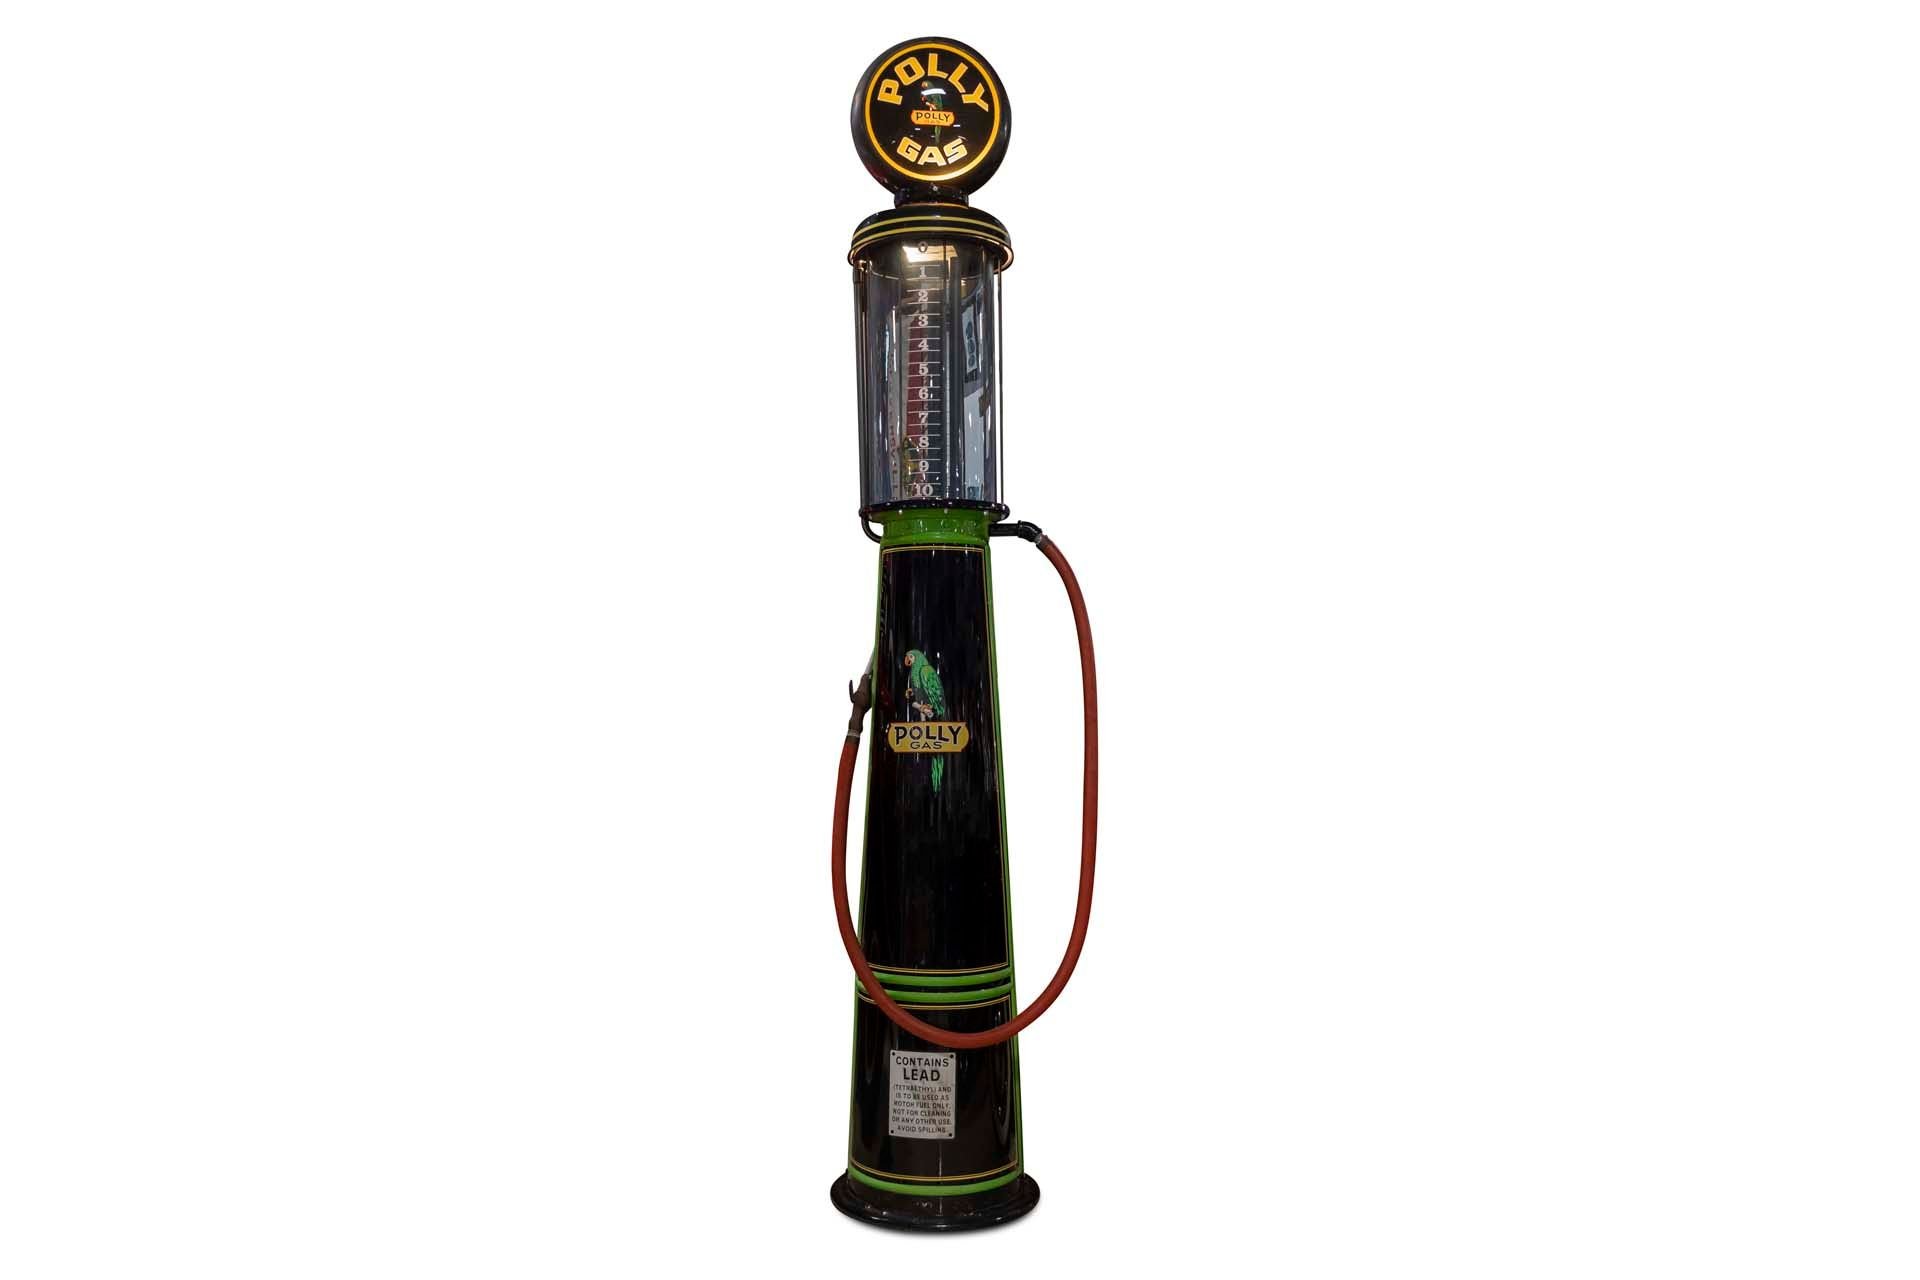 For Sale 'Polly Gas' Visible Gas Pump, Reproduction Glass Globe